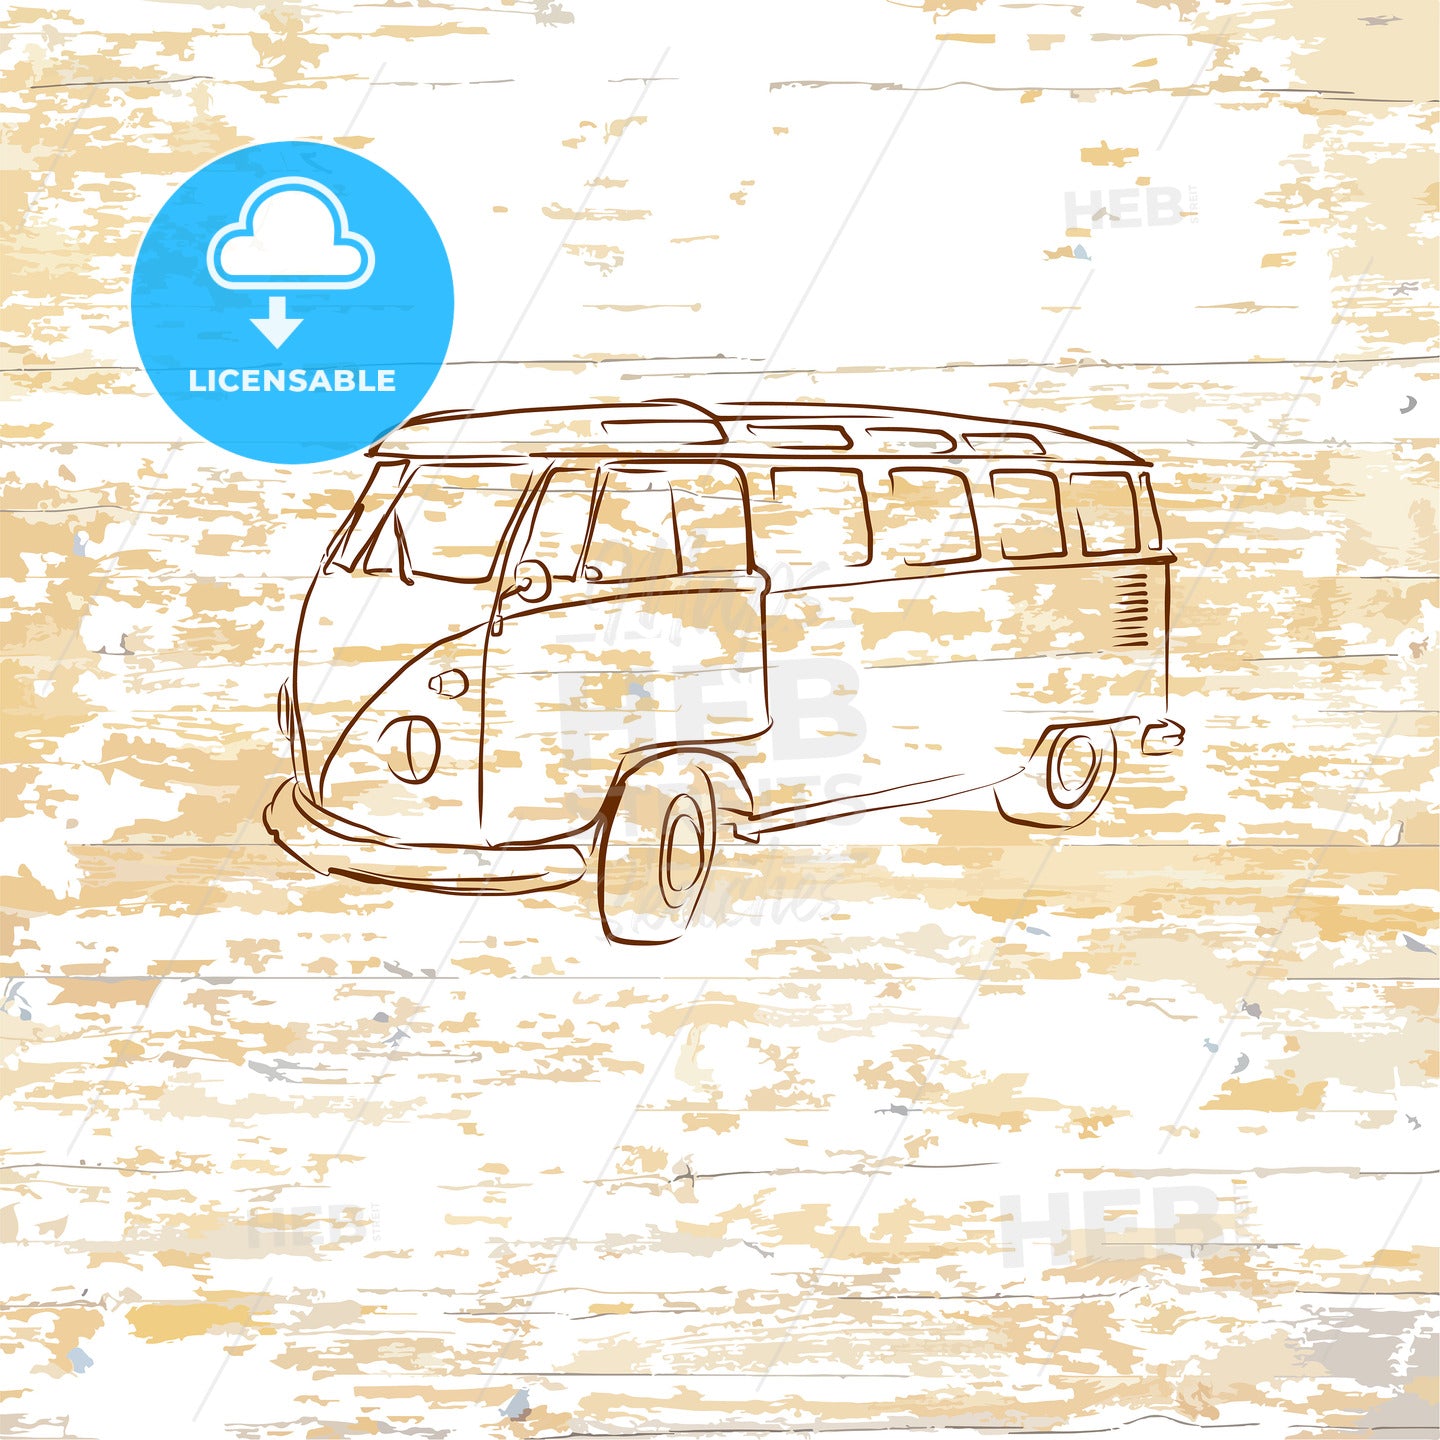 Vintage bus drawing on wooden background – instant download